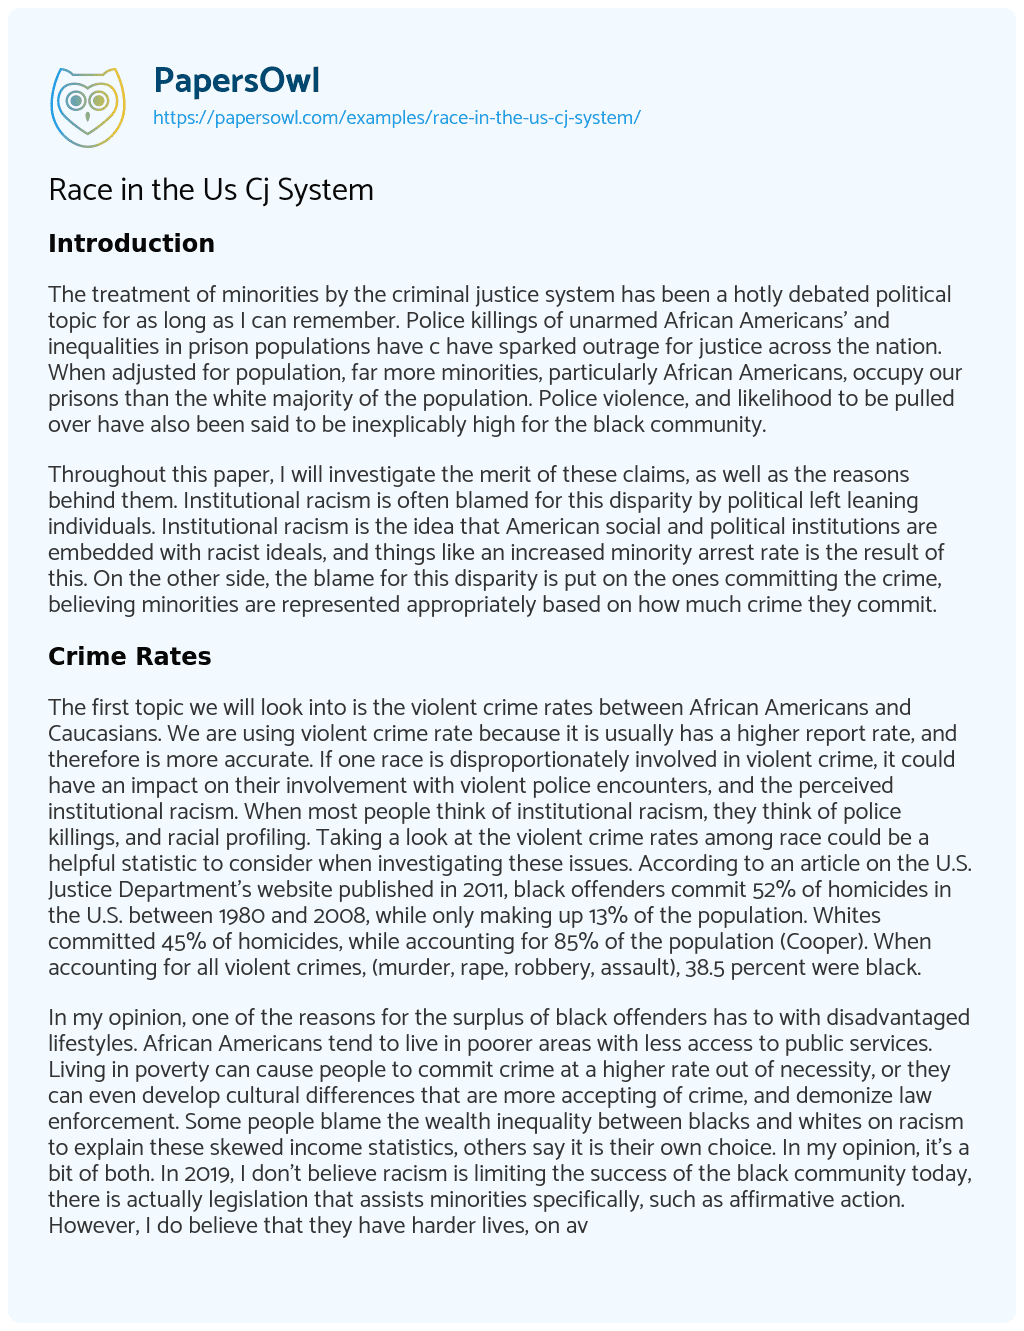 Race in the Us Cj System essay